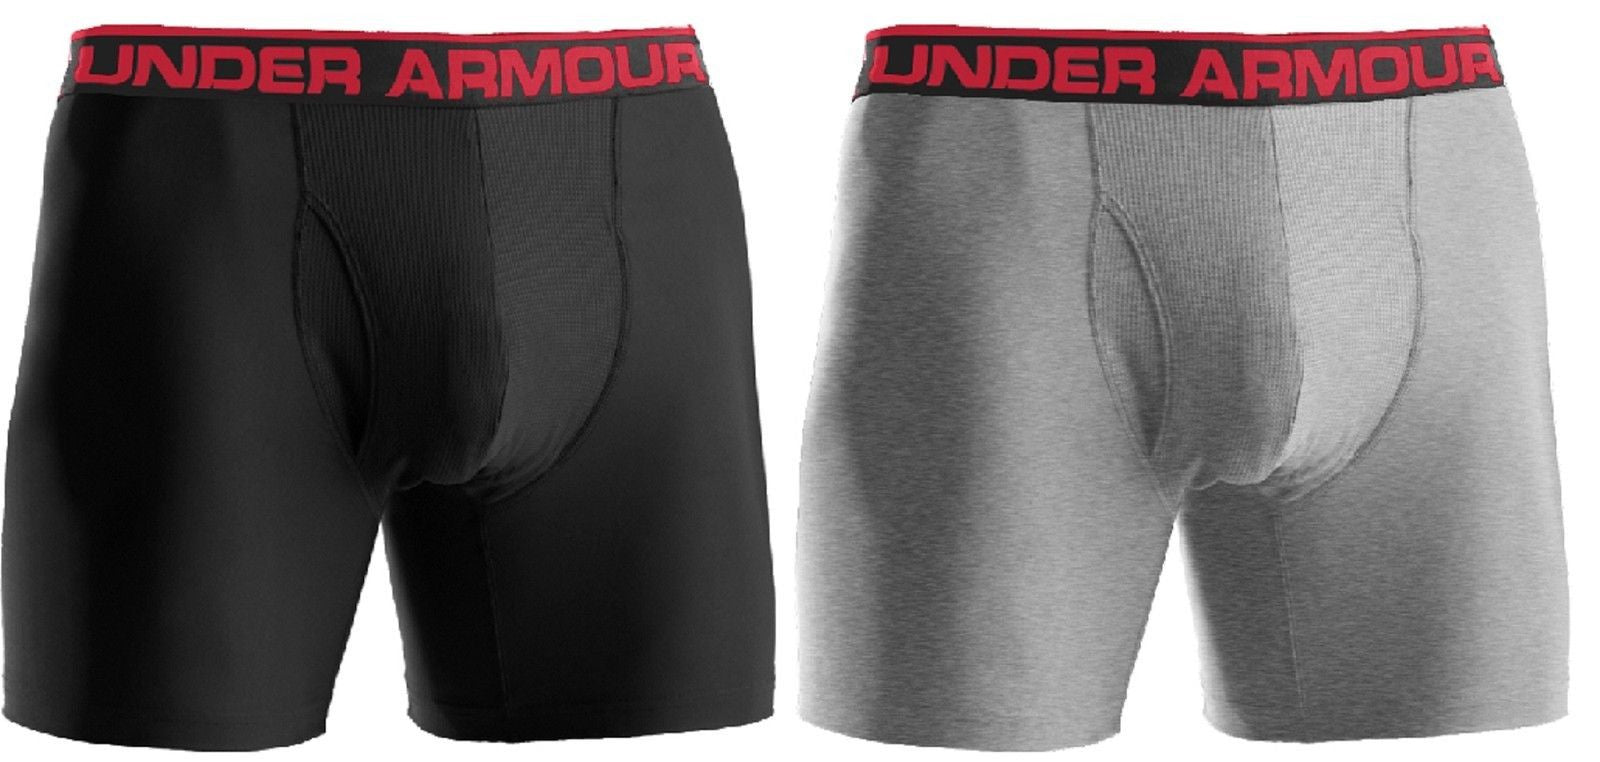 Under Armour: Spandex Boxers (Set of 2) Lime/Camo